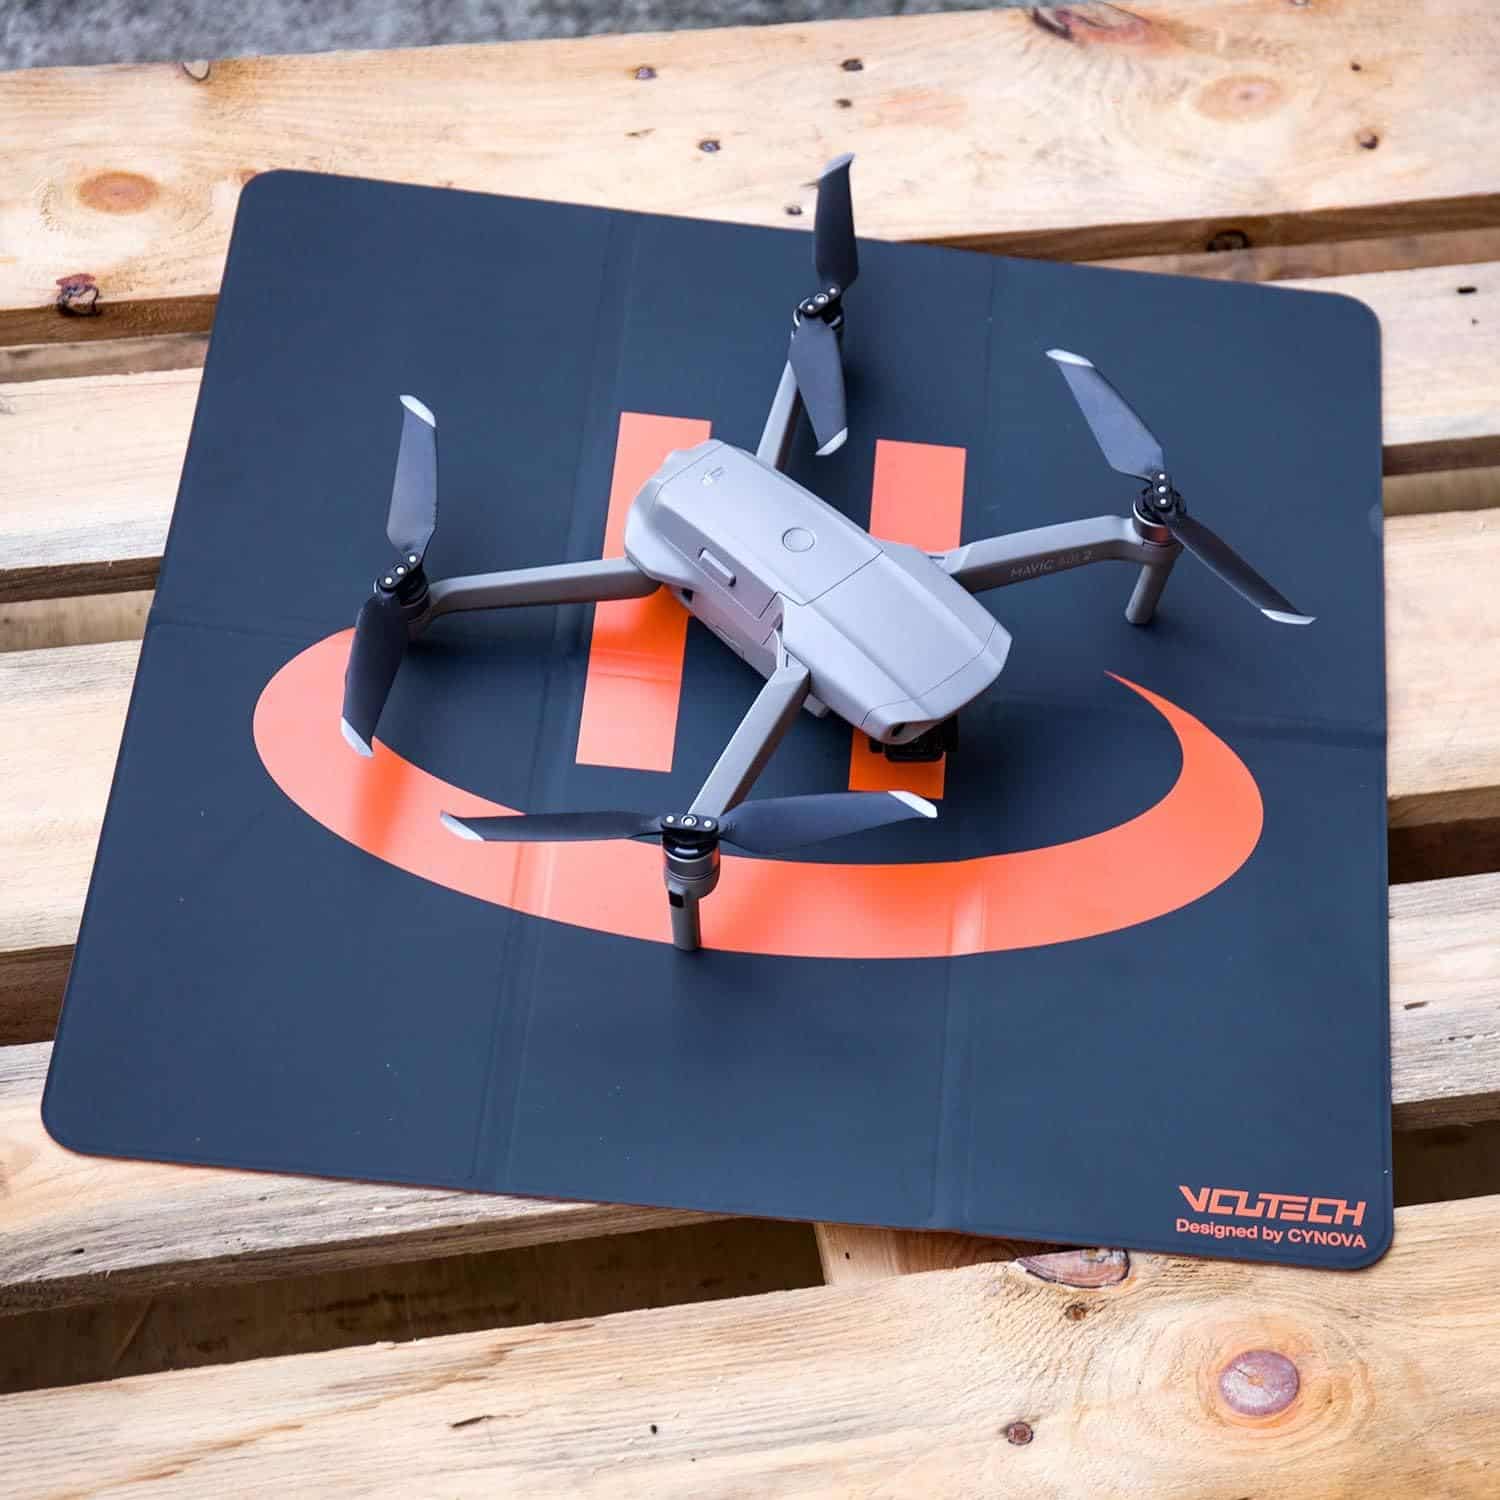 VCUTECH Drone Landing Pad Pro: The Perfect Accessory for Smooth Takeoff and Landing